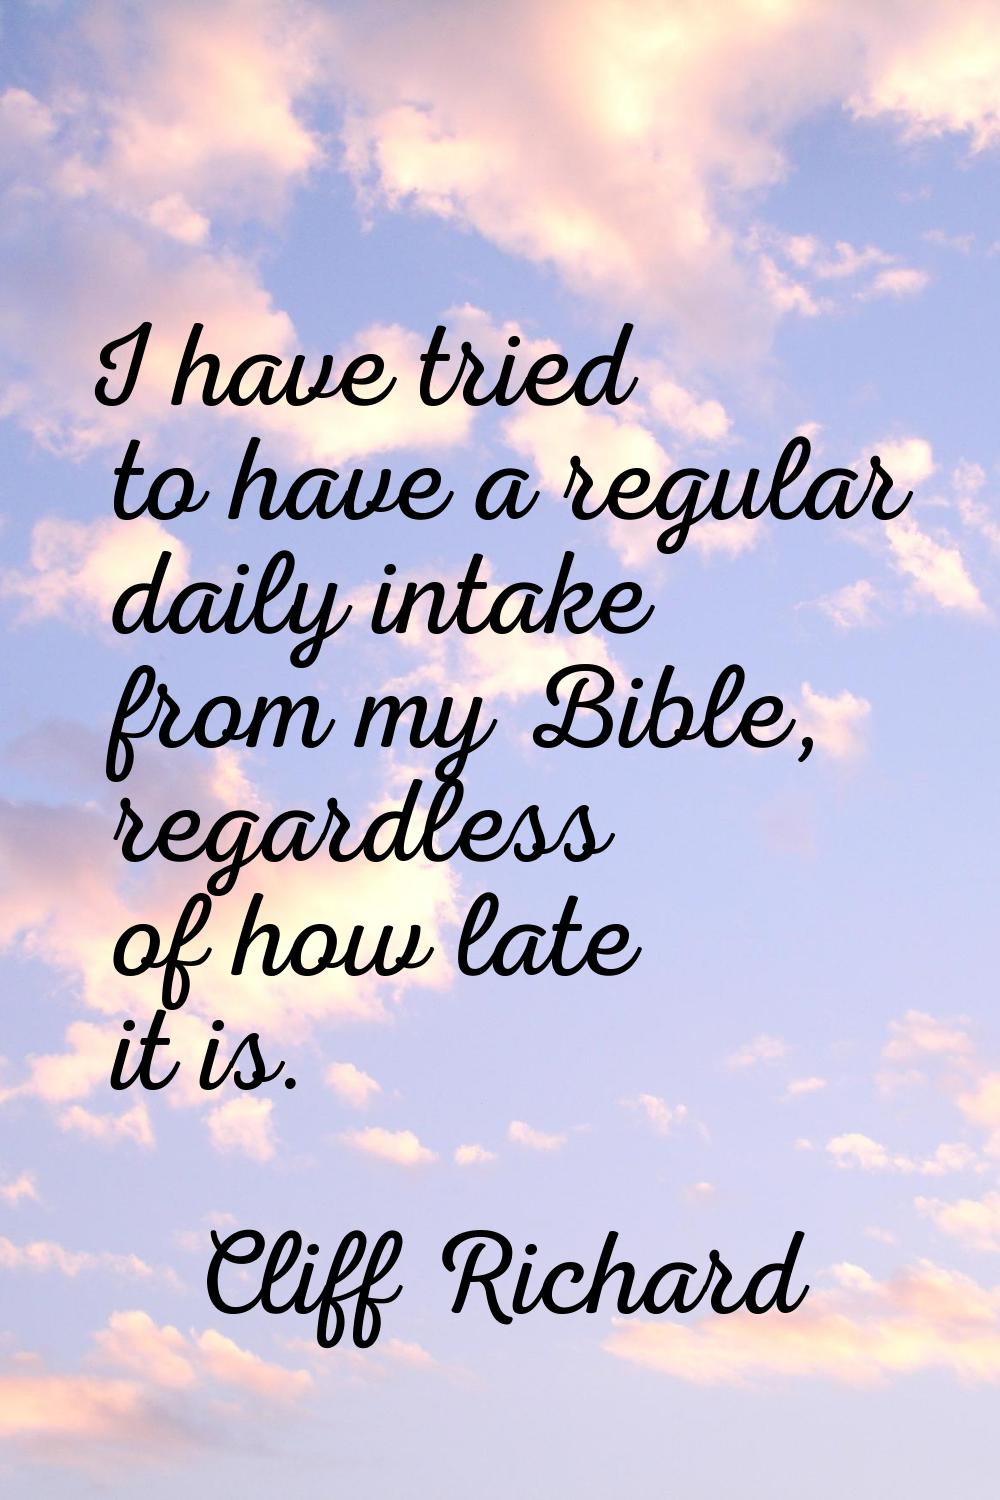 I have tried to have a regular daily intake from my Bible, regardless of how late it is.